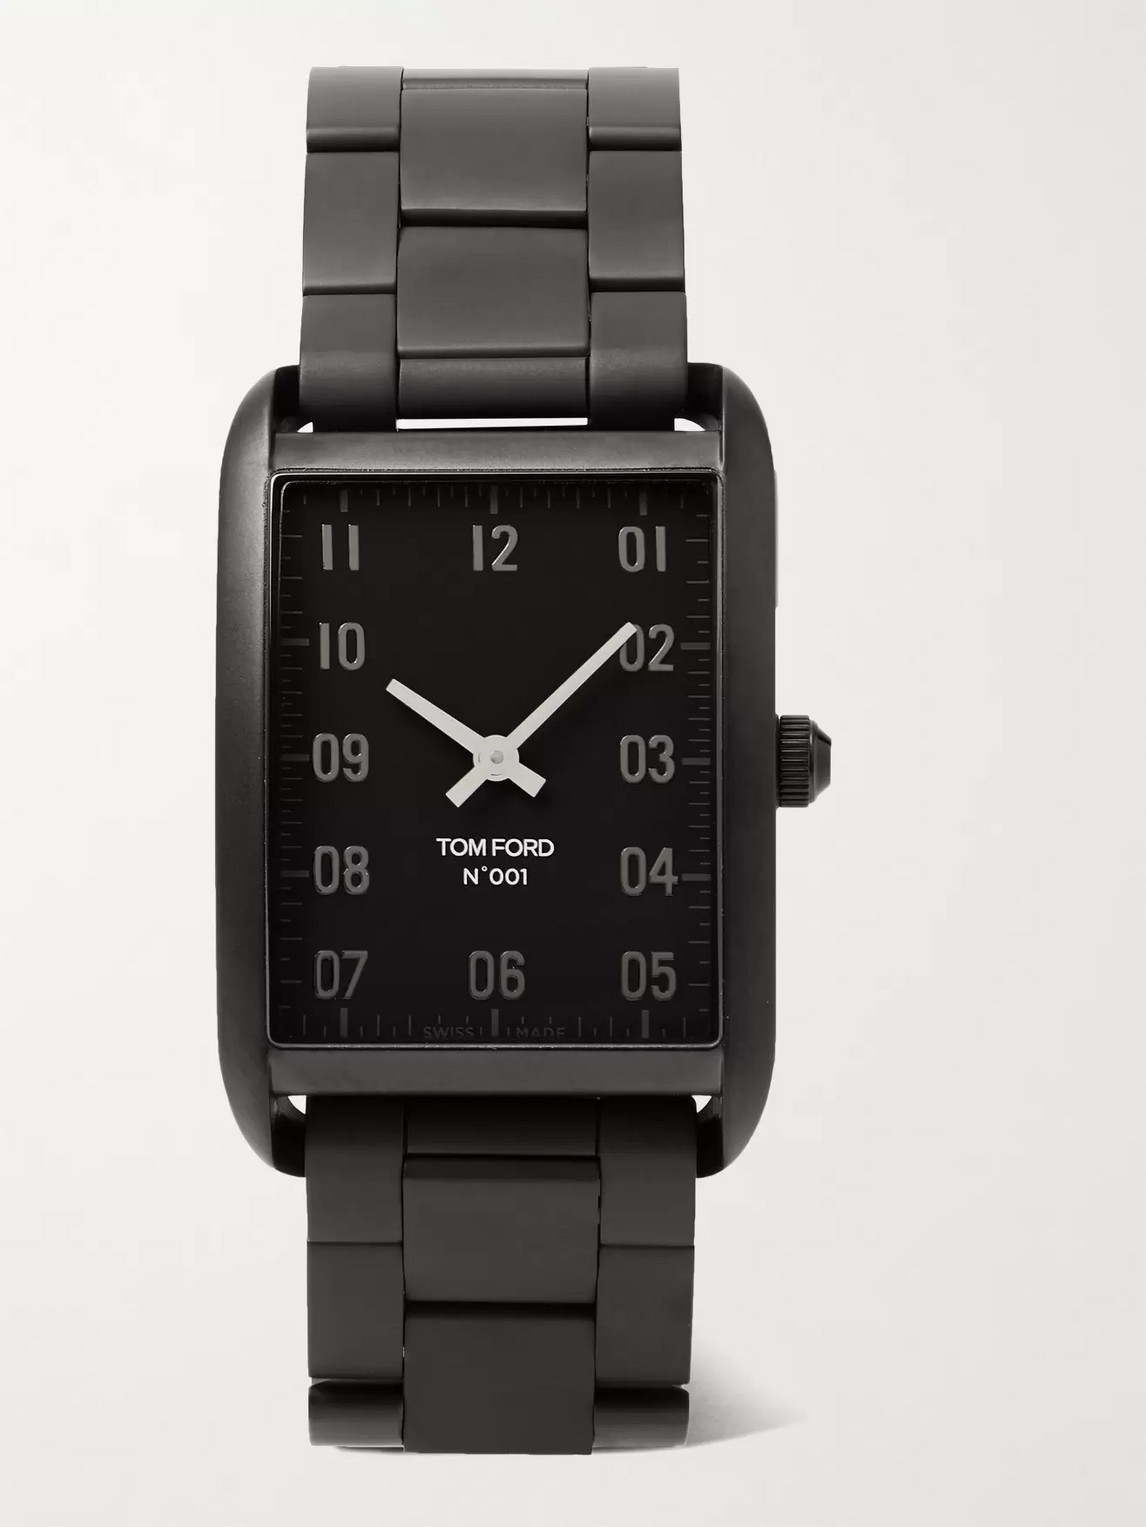 TOM FORD 001 DLC-COATED STAINLESS STEEL WATCH